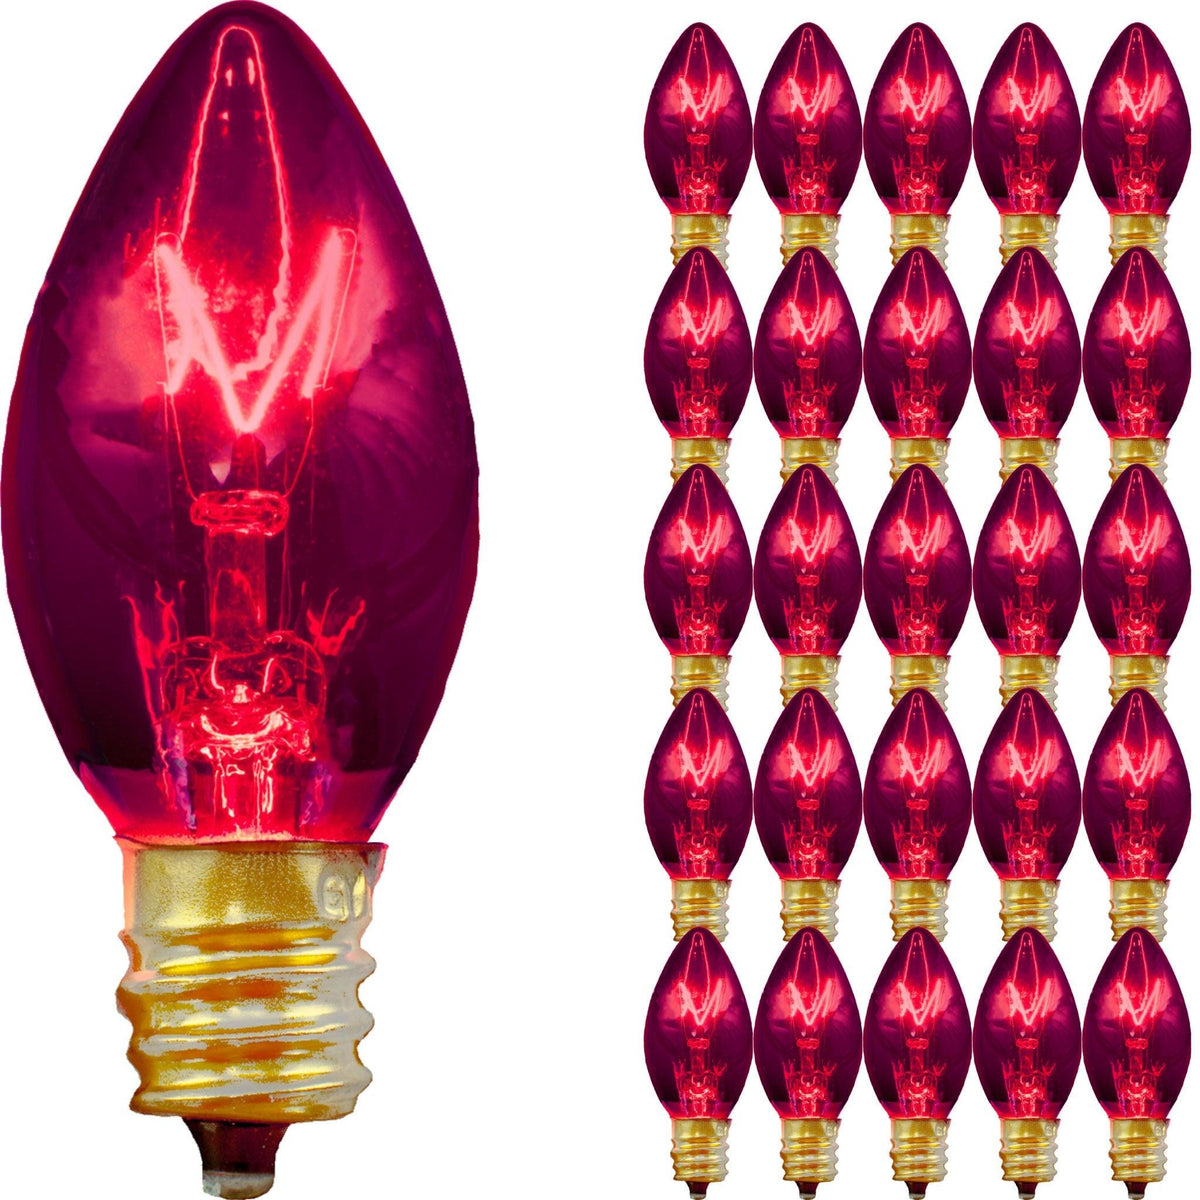 25FT Purple Outdoor String Lighting Set!    Choose between Twinkling Bulbs and Steady Burning Bulbs, White Wire or Green Wire Cords, C7 & C9 Size available.